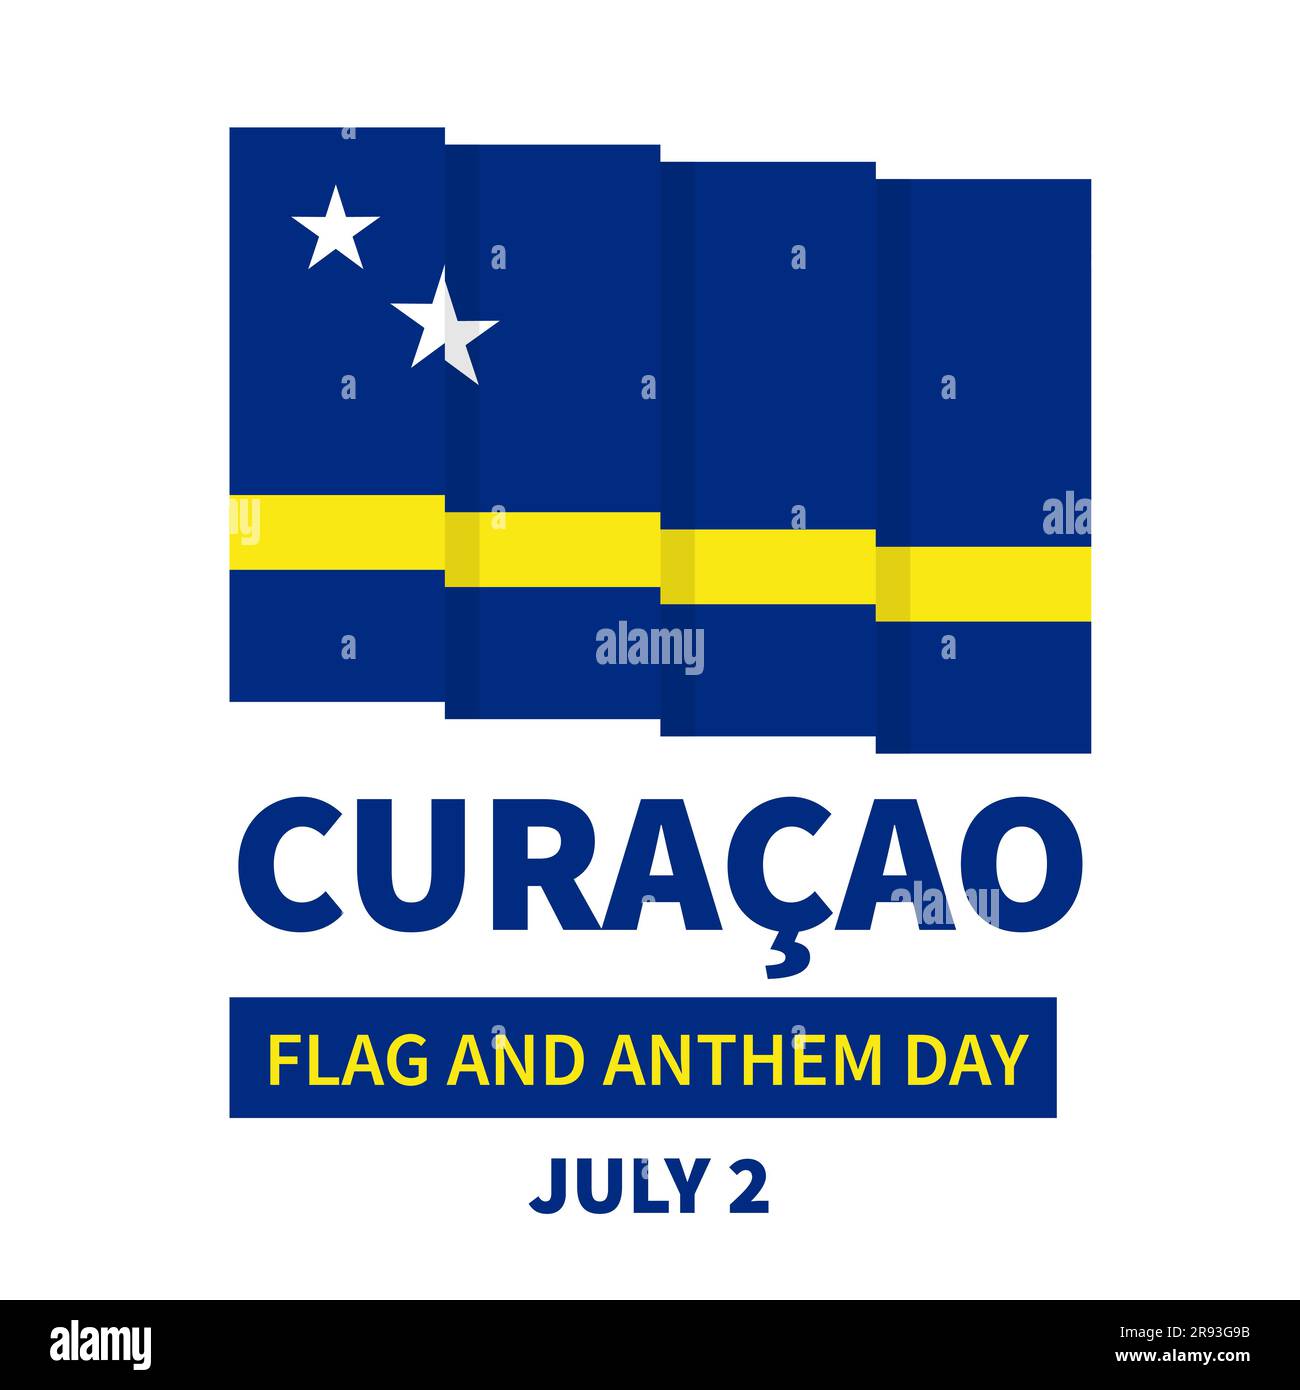 Curacao Flag and Anthem Day typography poster. National holiday celebrated on July 2. Vector template for banner, greeting card, flyer, etc. Stock Vector